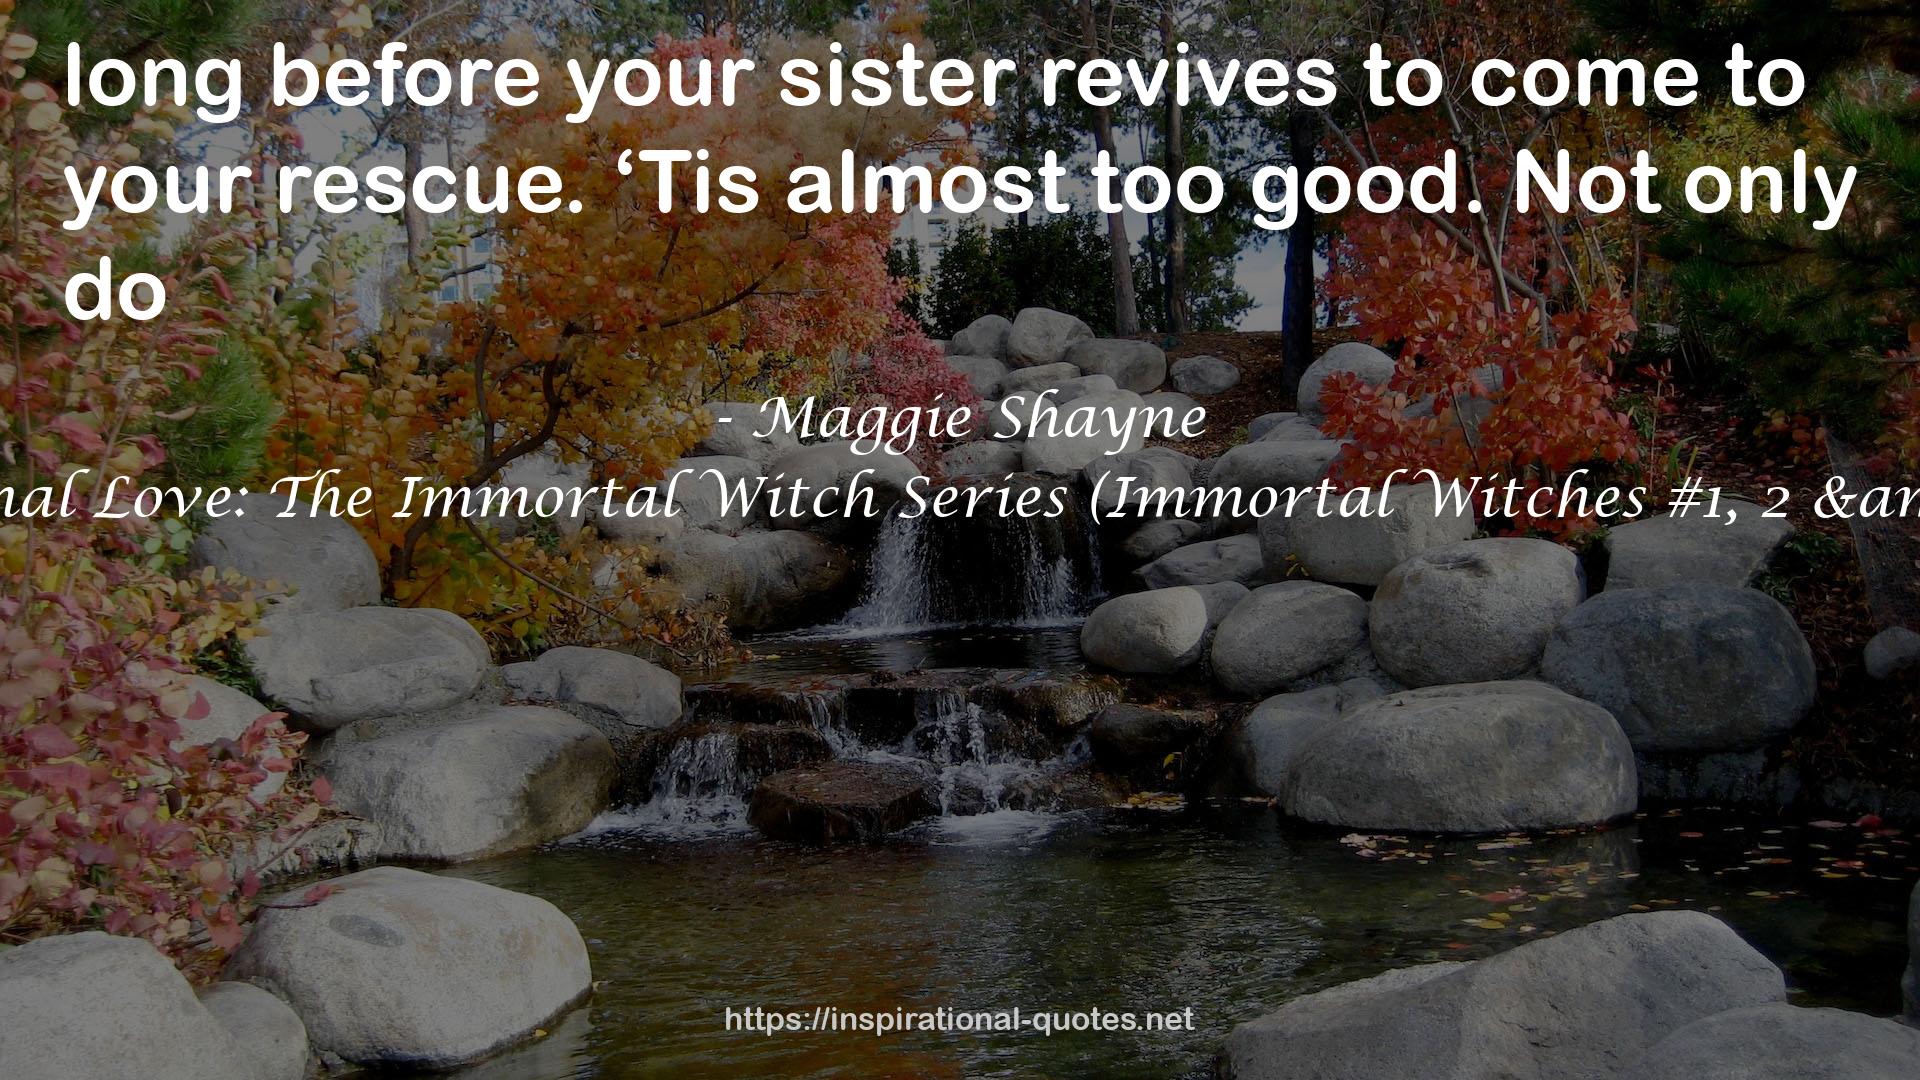 Eternal Love: The Immortal Witch Series (Immortal Witches #1, 2 & 3) QUOTES